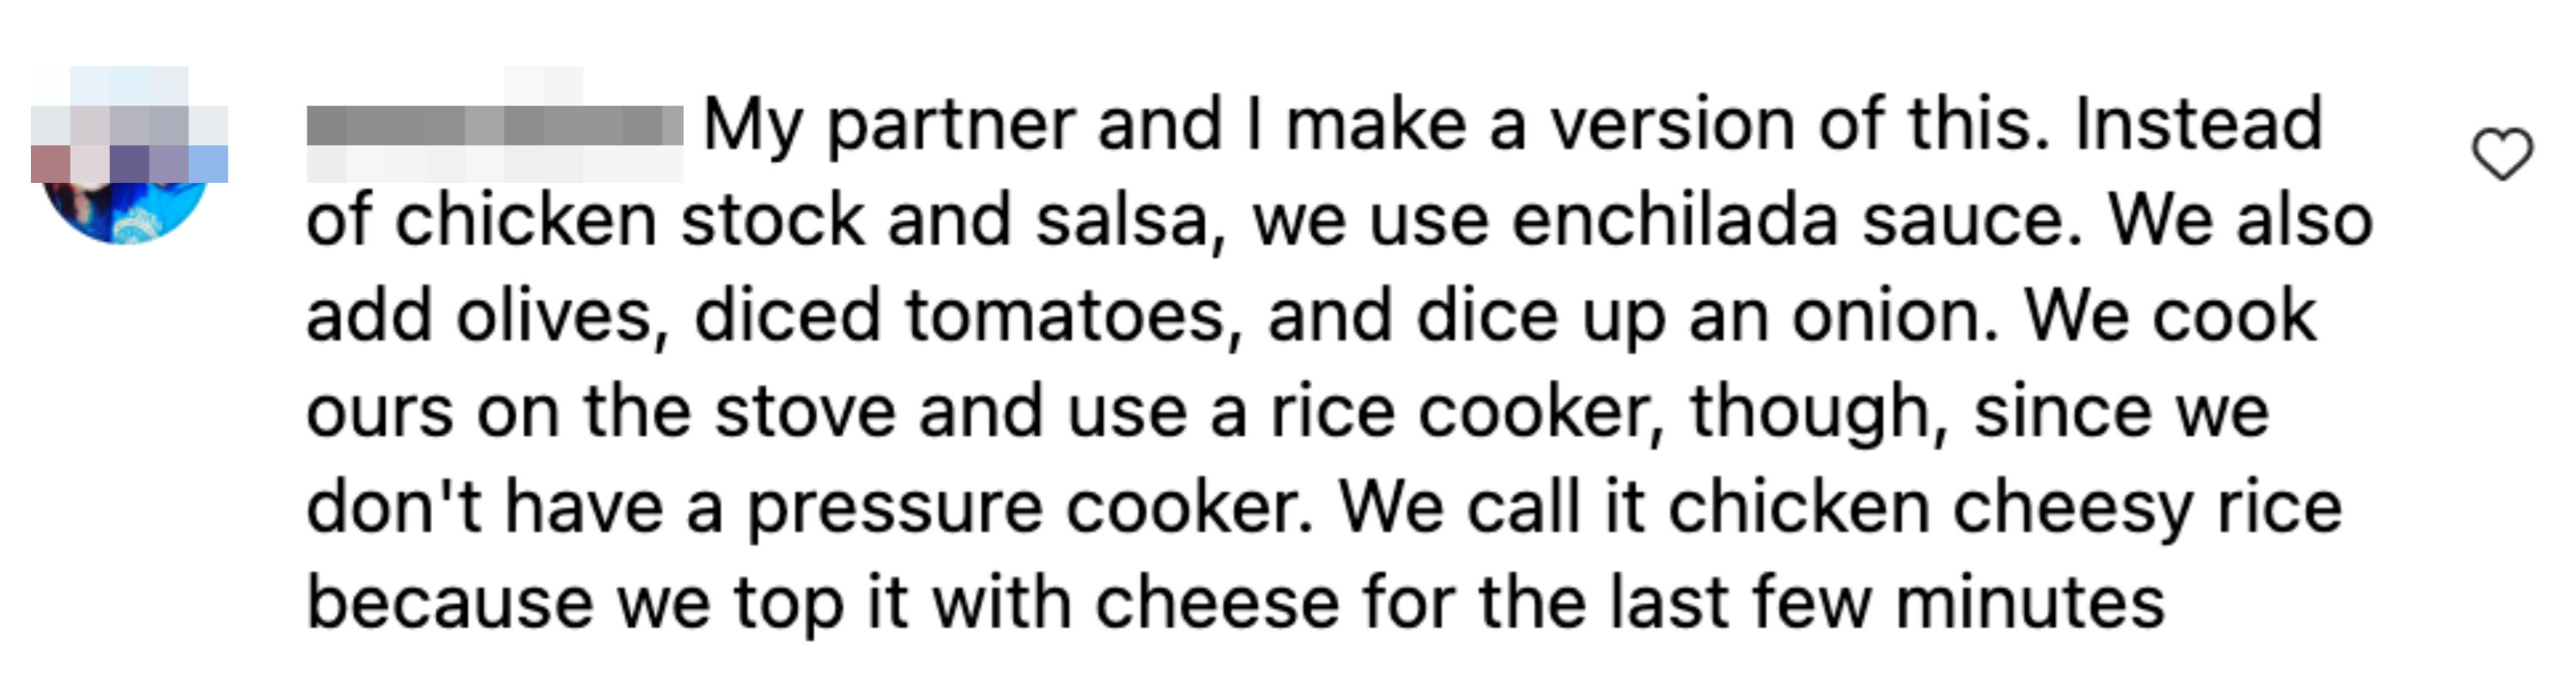 This commenter said they also add olives, dice tomatoes, and a diced onion. They also cook their on the stove and use a rice cooker. They call it chicken cheesy rice because they top it with cheese for the last few minutes